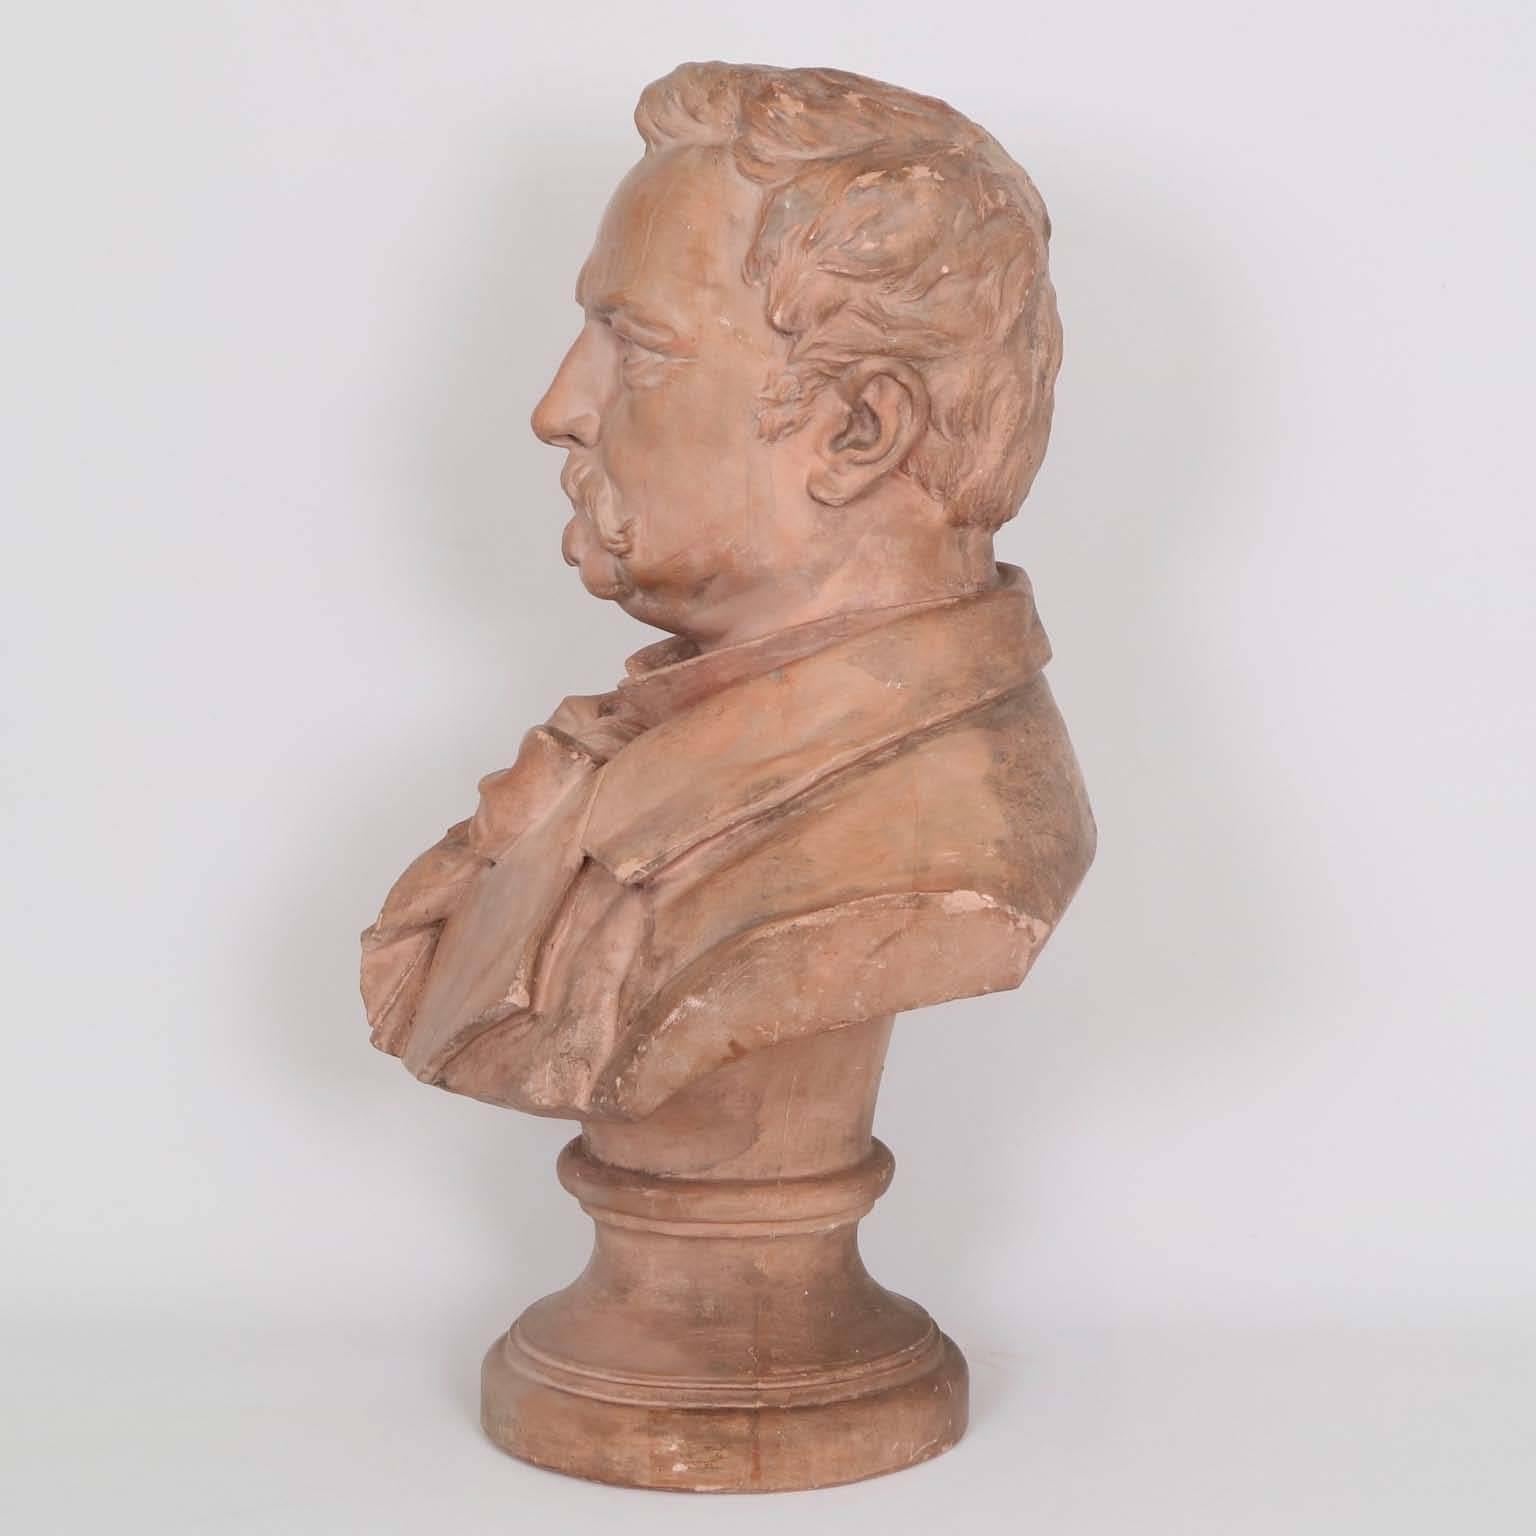 A French 19th century terracotta bust of novelist Victor Hugo, signed and dated [Jivoy, 1883] to the right shoulder by the artist. This piece remains in very good antique condition, wear consistent with age and use.